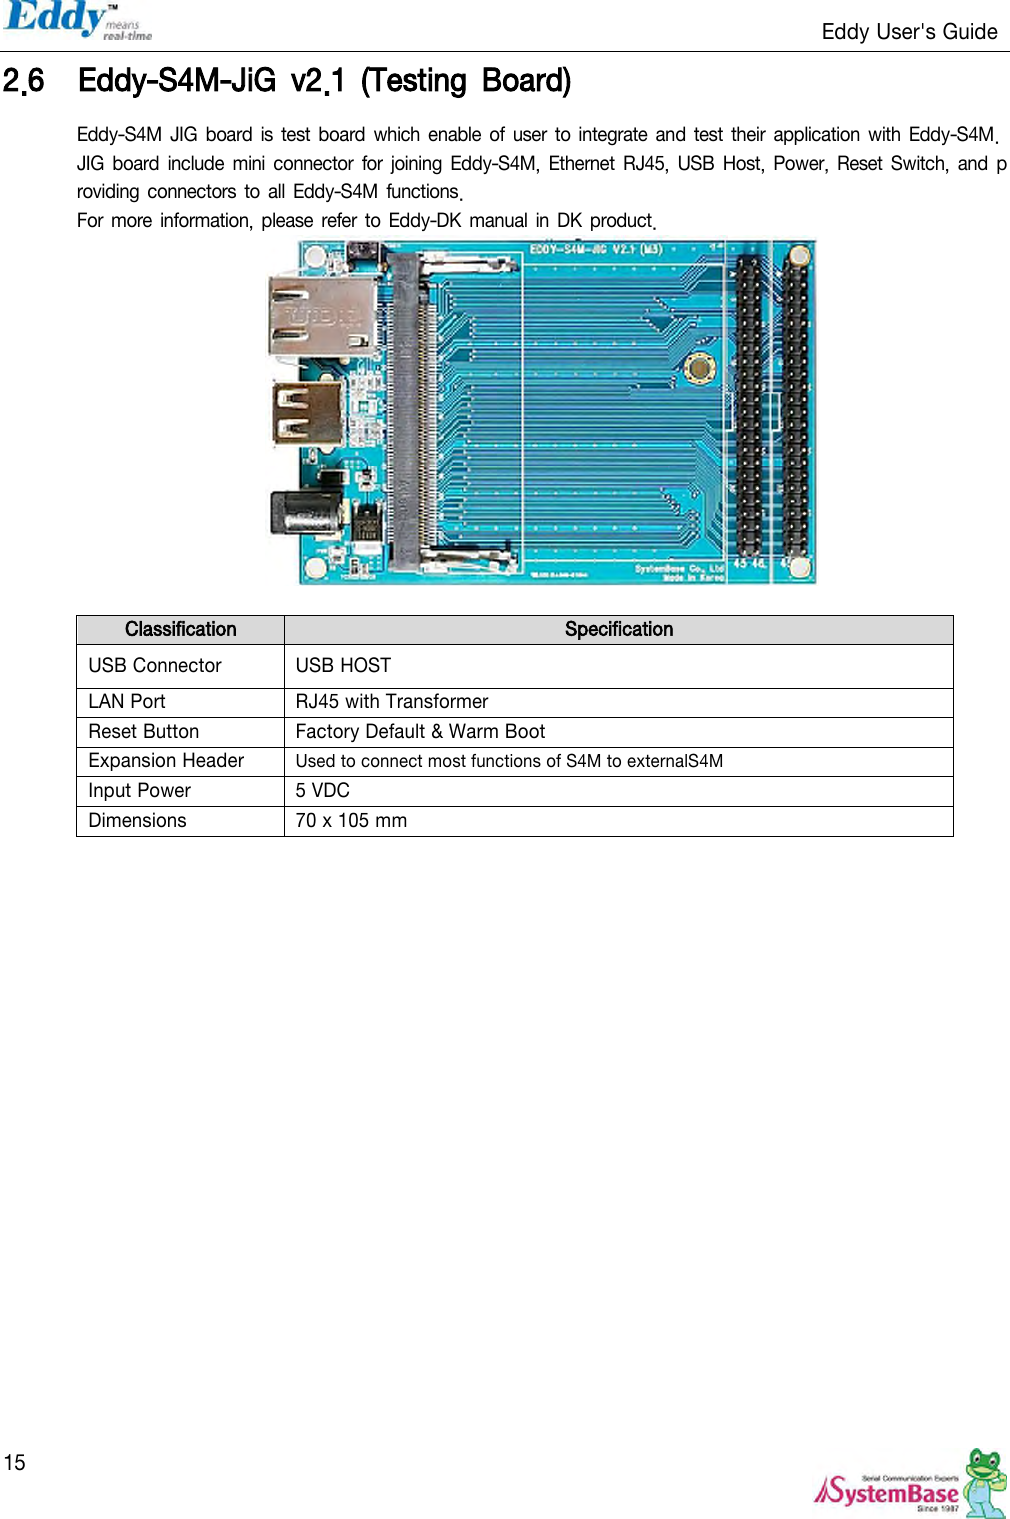                                                                   Eddy User&apos;s Guide   15 2.6 Eddy-S4M-JiG  v2.1  (Testing  Board) Eddy-S4M  JIG board is test board which  enable  of  user to integrate and test  their  application with Eddy-S4M. JIG  board  include mini connector for  joining  Eddy-S4M, Ethernet  RJ45, USB Host,  Power,  Reset  Switch,  and  providing connectors  to  all  Eddy-S4M  functions. For more information, please refer to Eddy-DK  manual in DK  product.   Classification Specification USB Connector USB HOST LAN Port RJ45 with Transformer Reset Button Factory Default &amp; Warm Boot Expansion Header Used to connect most functions of S4M to externalS4M Input Power 5 VDC Dimensions 70 x 105 mm  